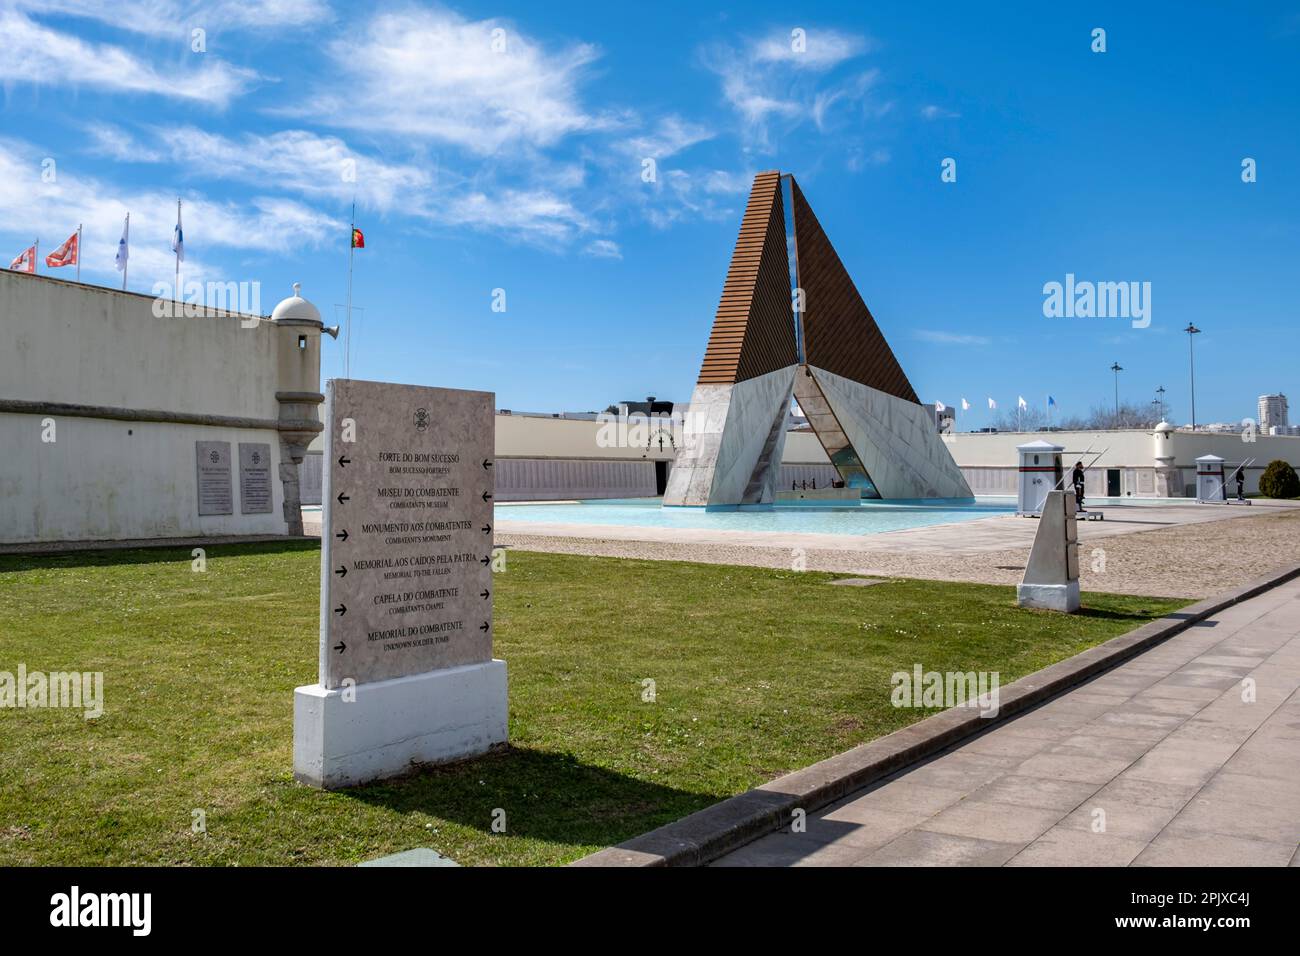 Monument to the Overseas Combatants at Belem, Lisbon, Portugal Stock Photo